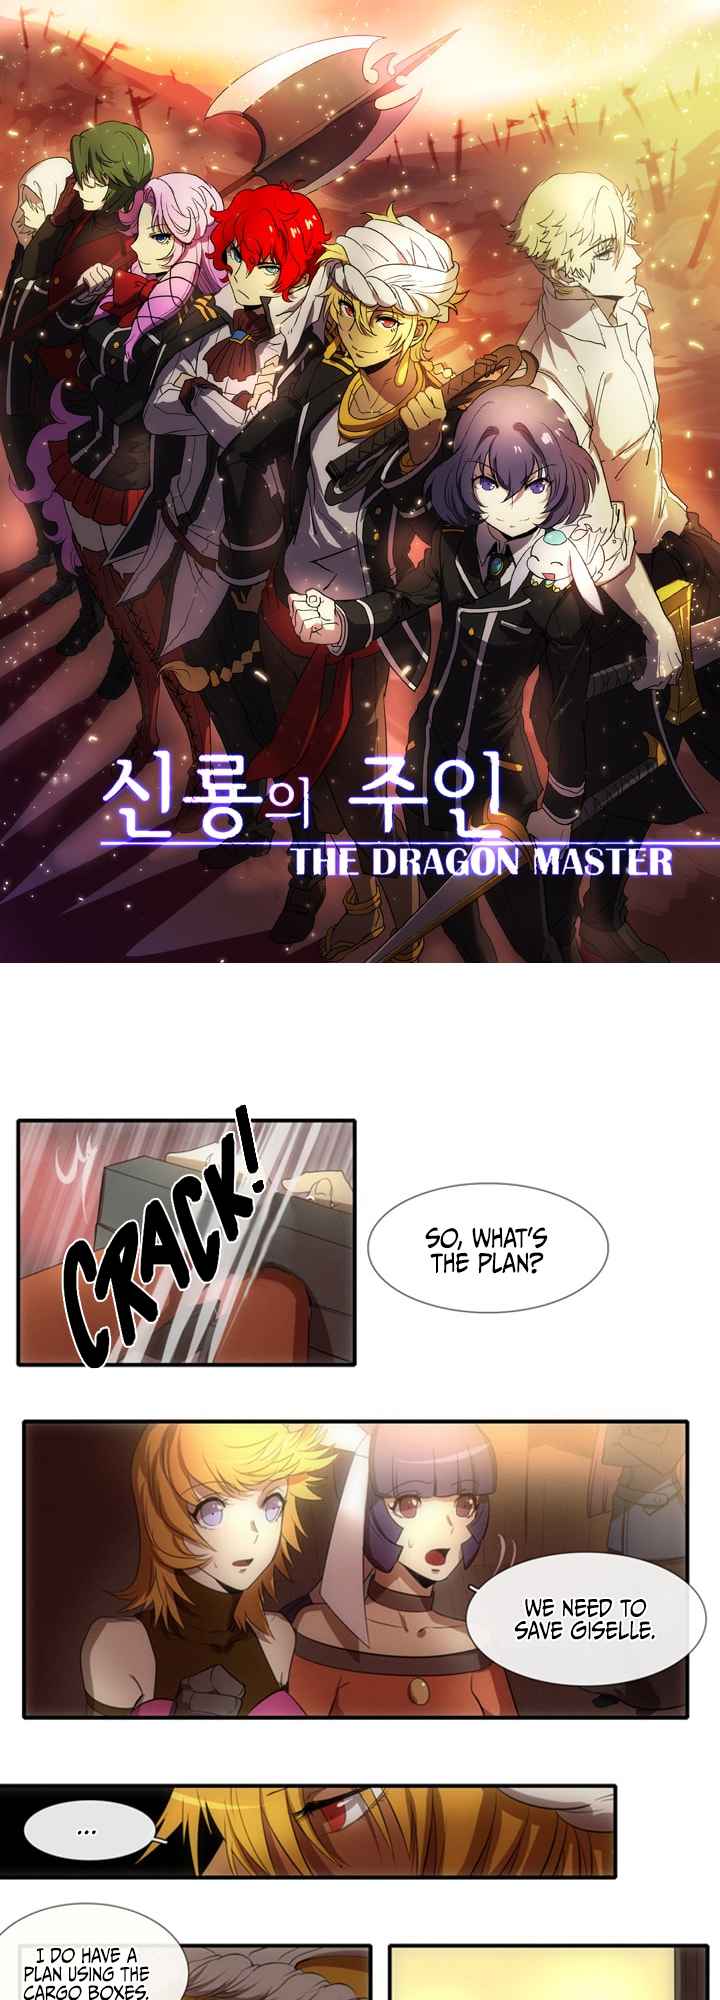 The Dragon Master - Page 2